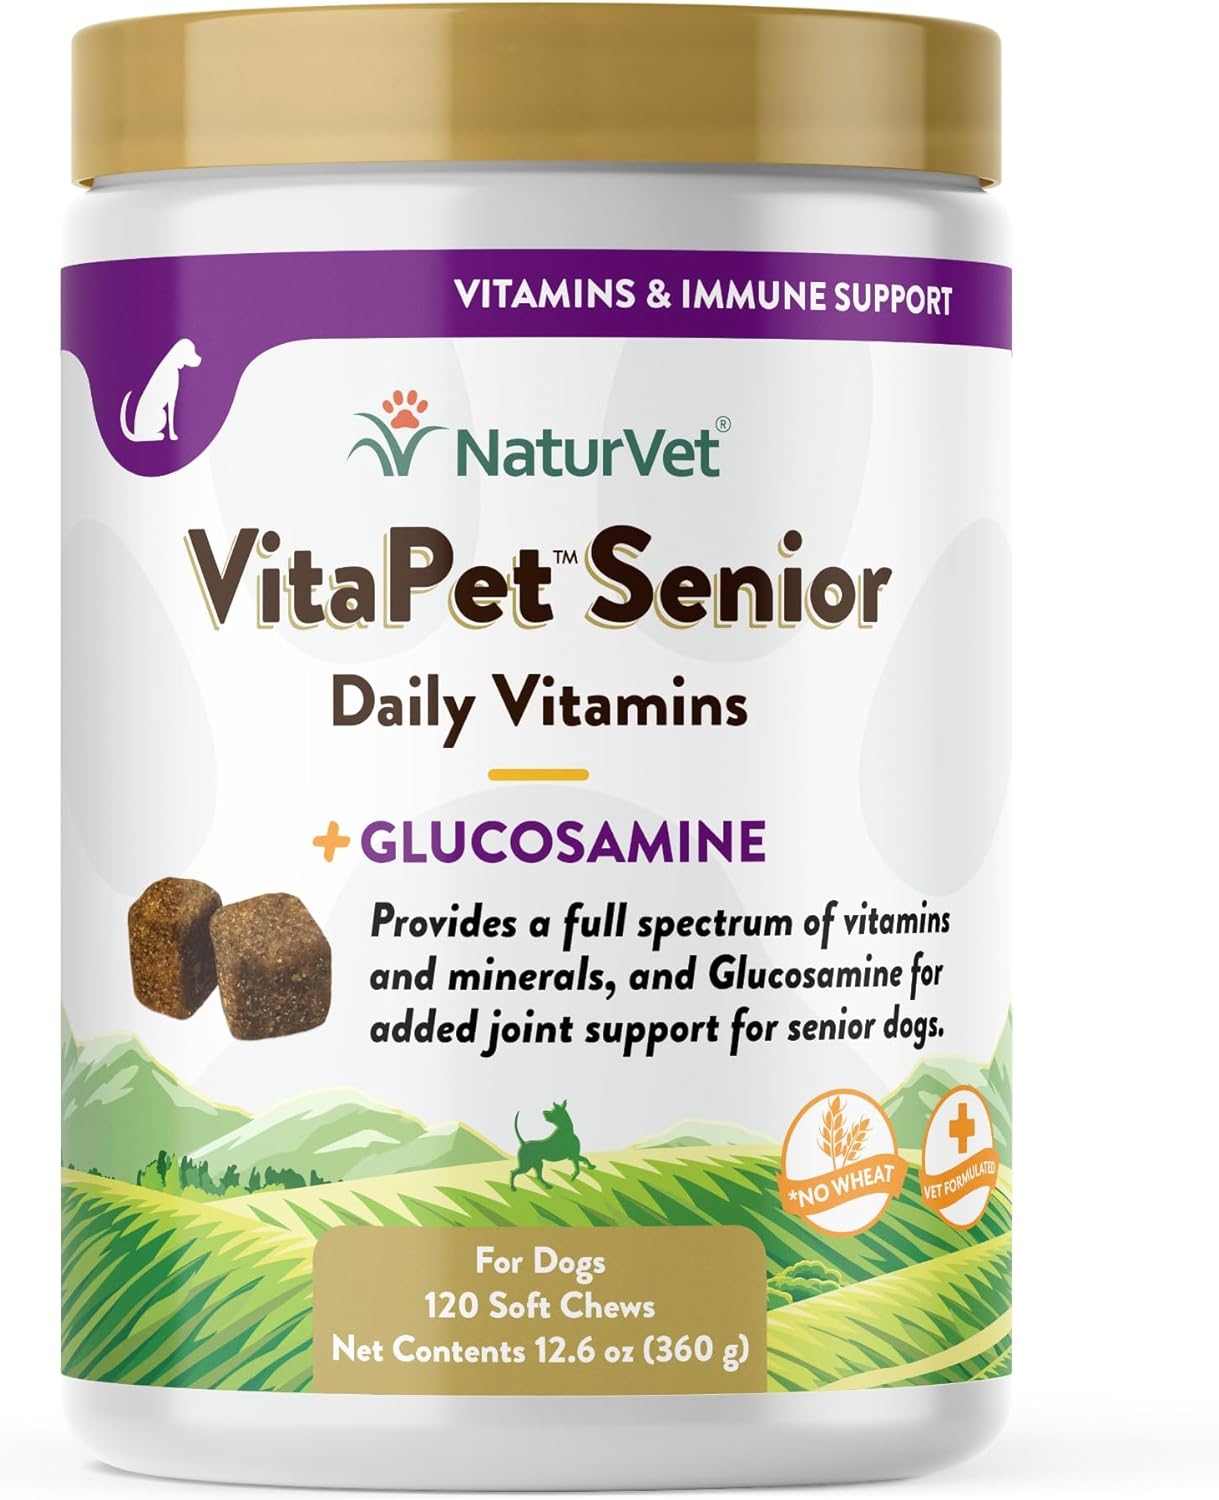 NaturVet VitaPet Senior Daily Vitamin Dog Supplements Plus Glucosamine – Includes Full-Spectrum Vitamins, Minerals – Joint Support for Older, Active Dogs – 120 Ct. Soft Chews